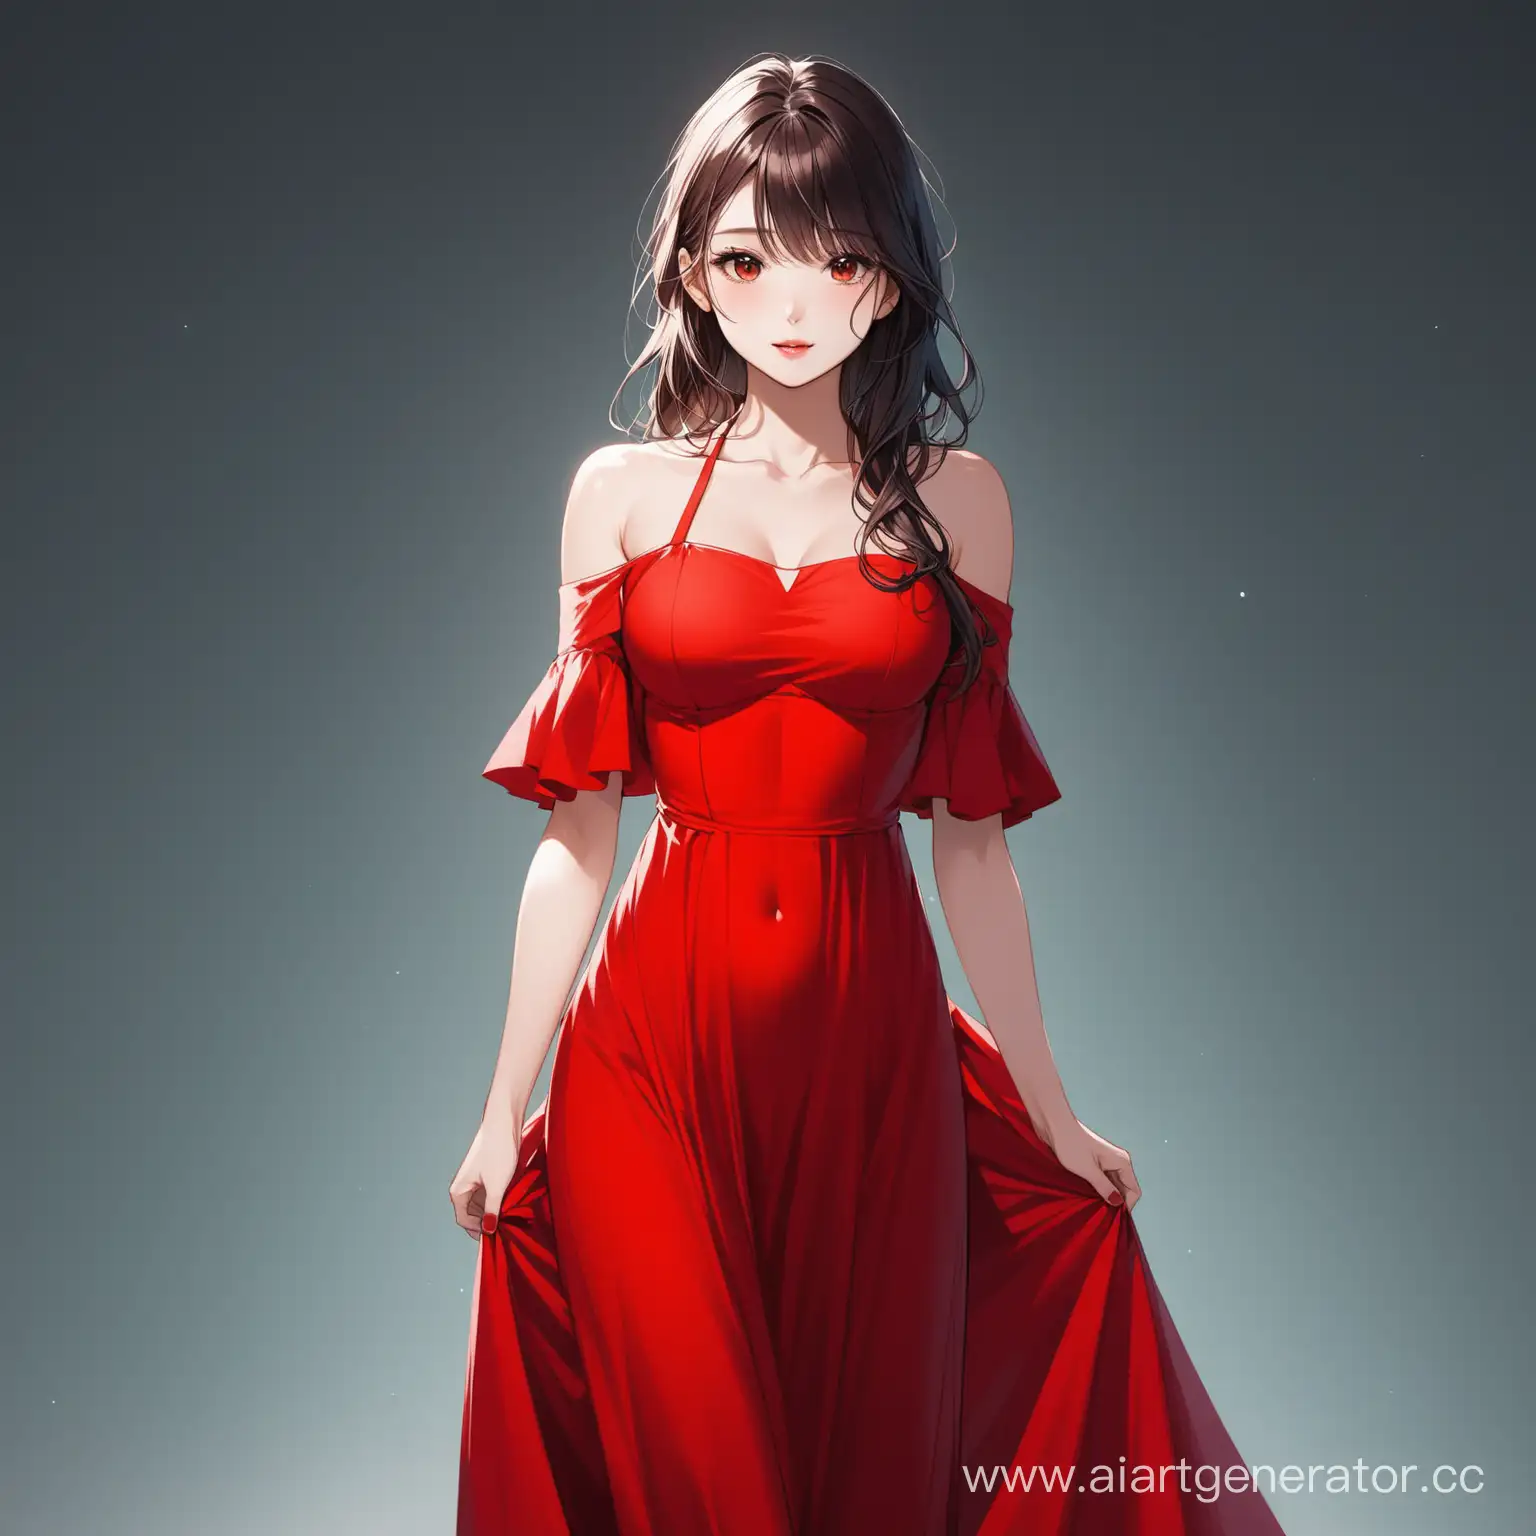 Adorable-Girl-in-a-Vibrant-Red-Dress